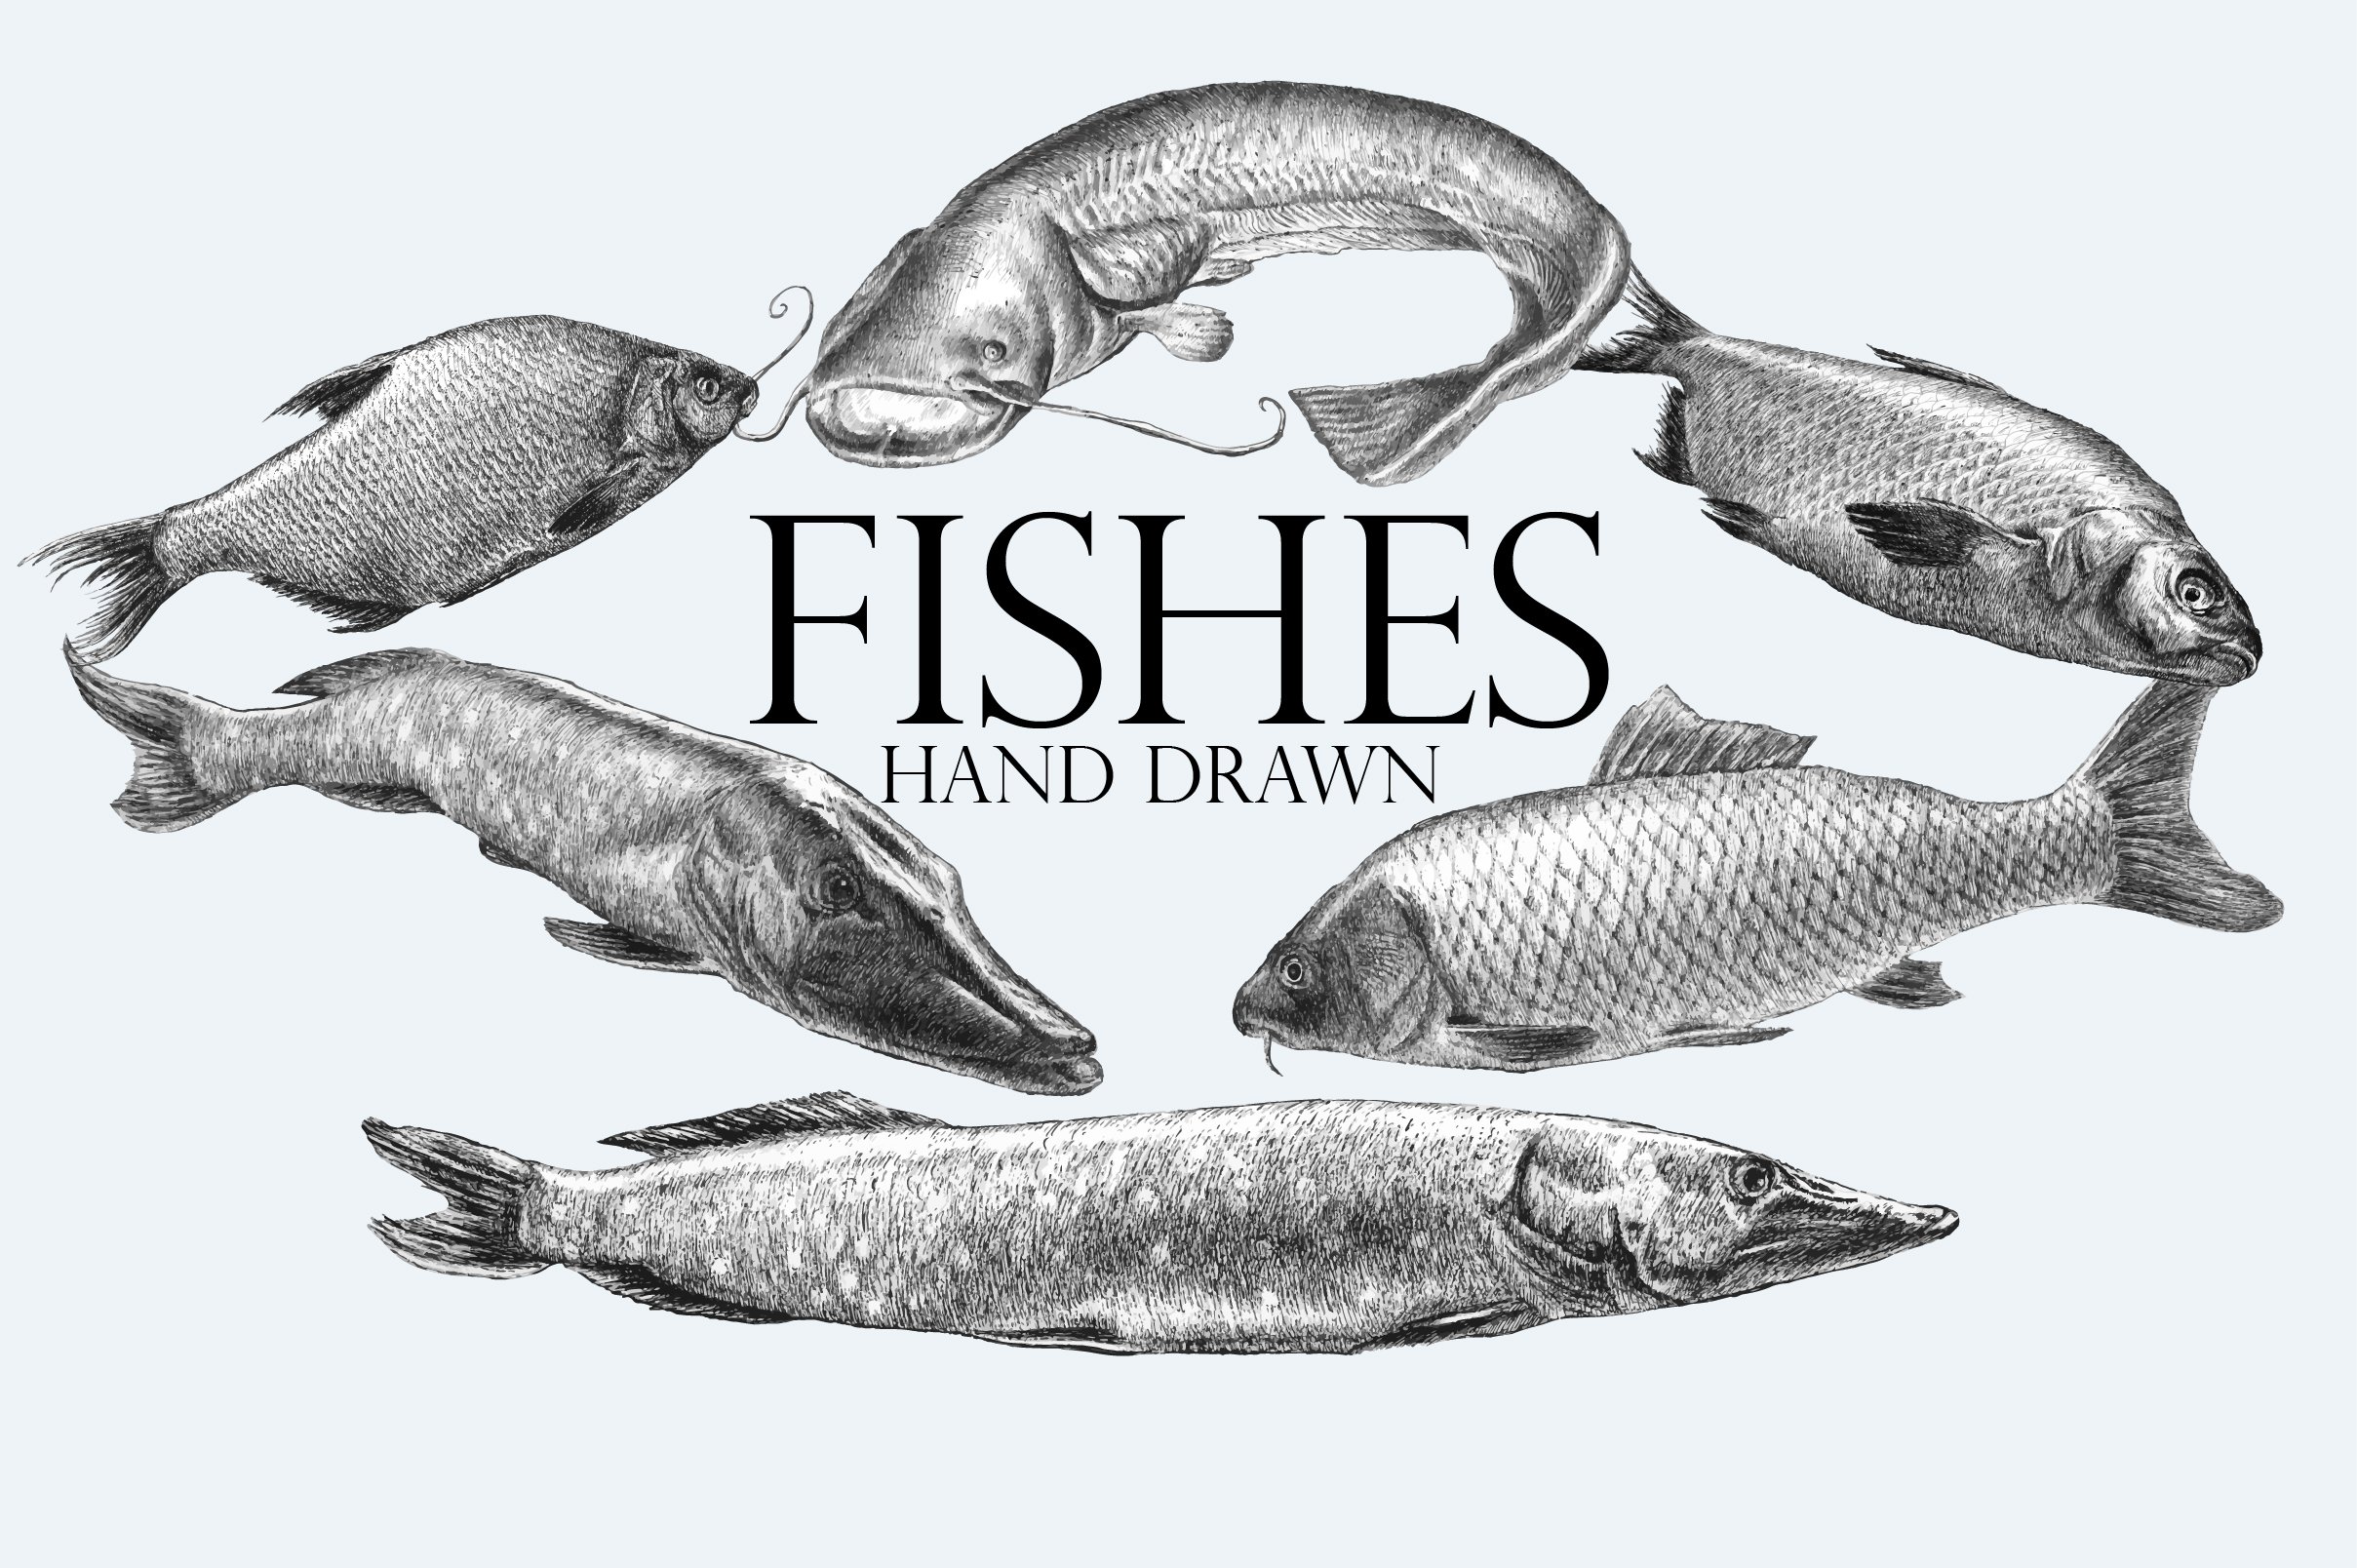 Fishes. Hand drawn. cover image.